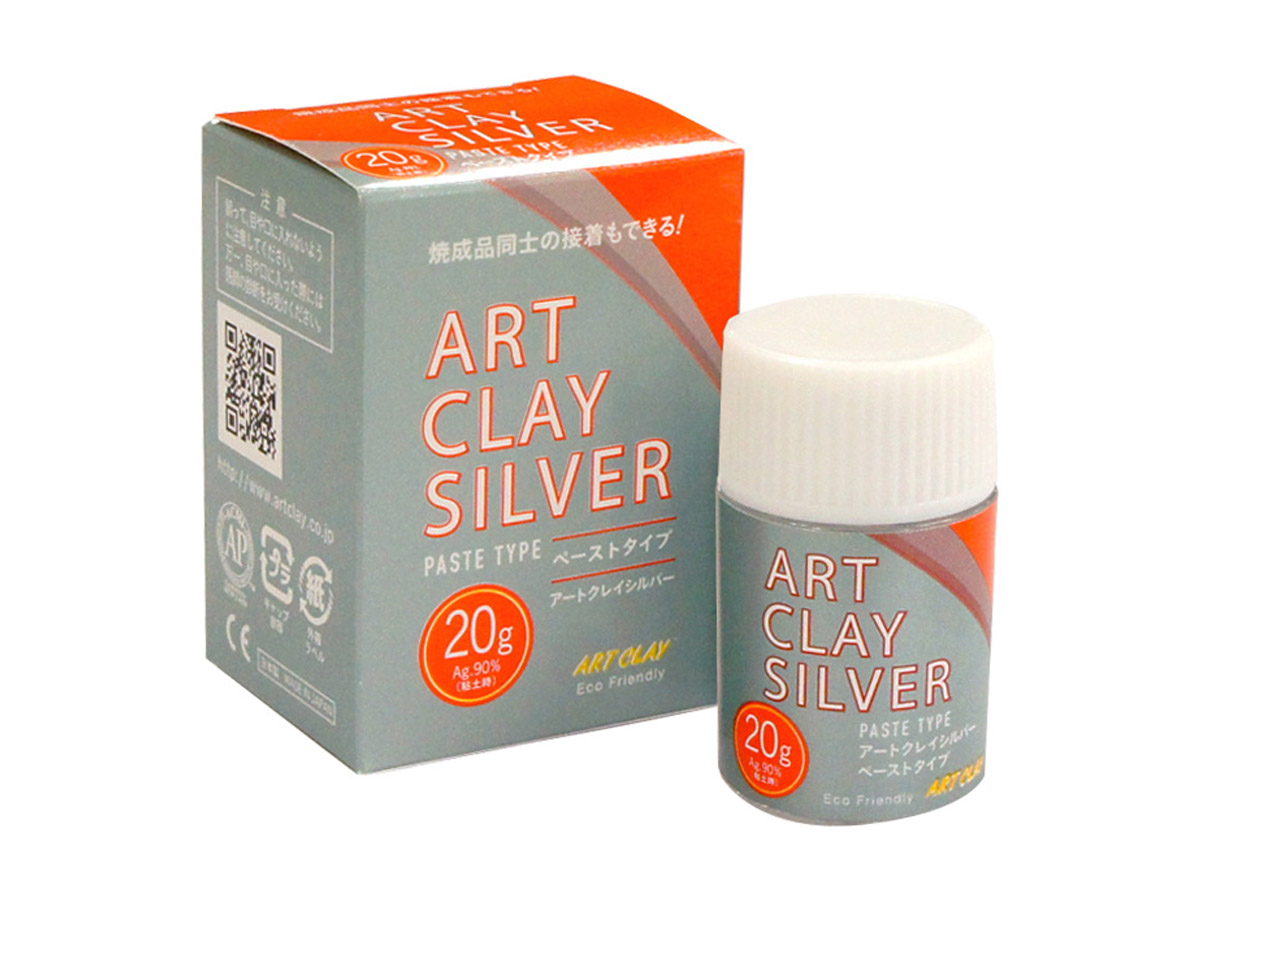 Do you have instructions for Art Clay Silver 20g Paste?